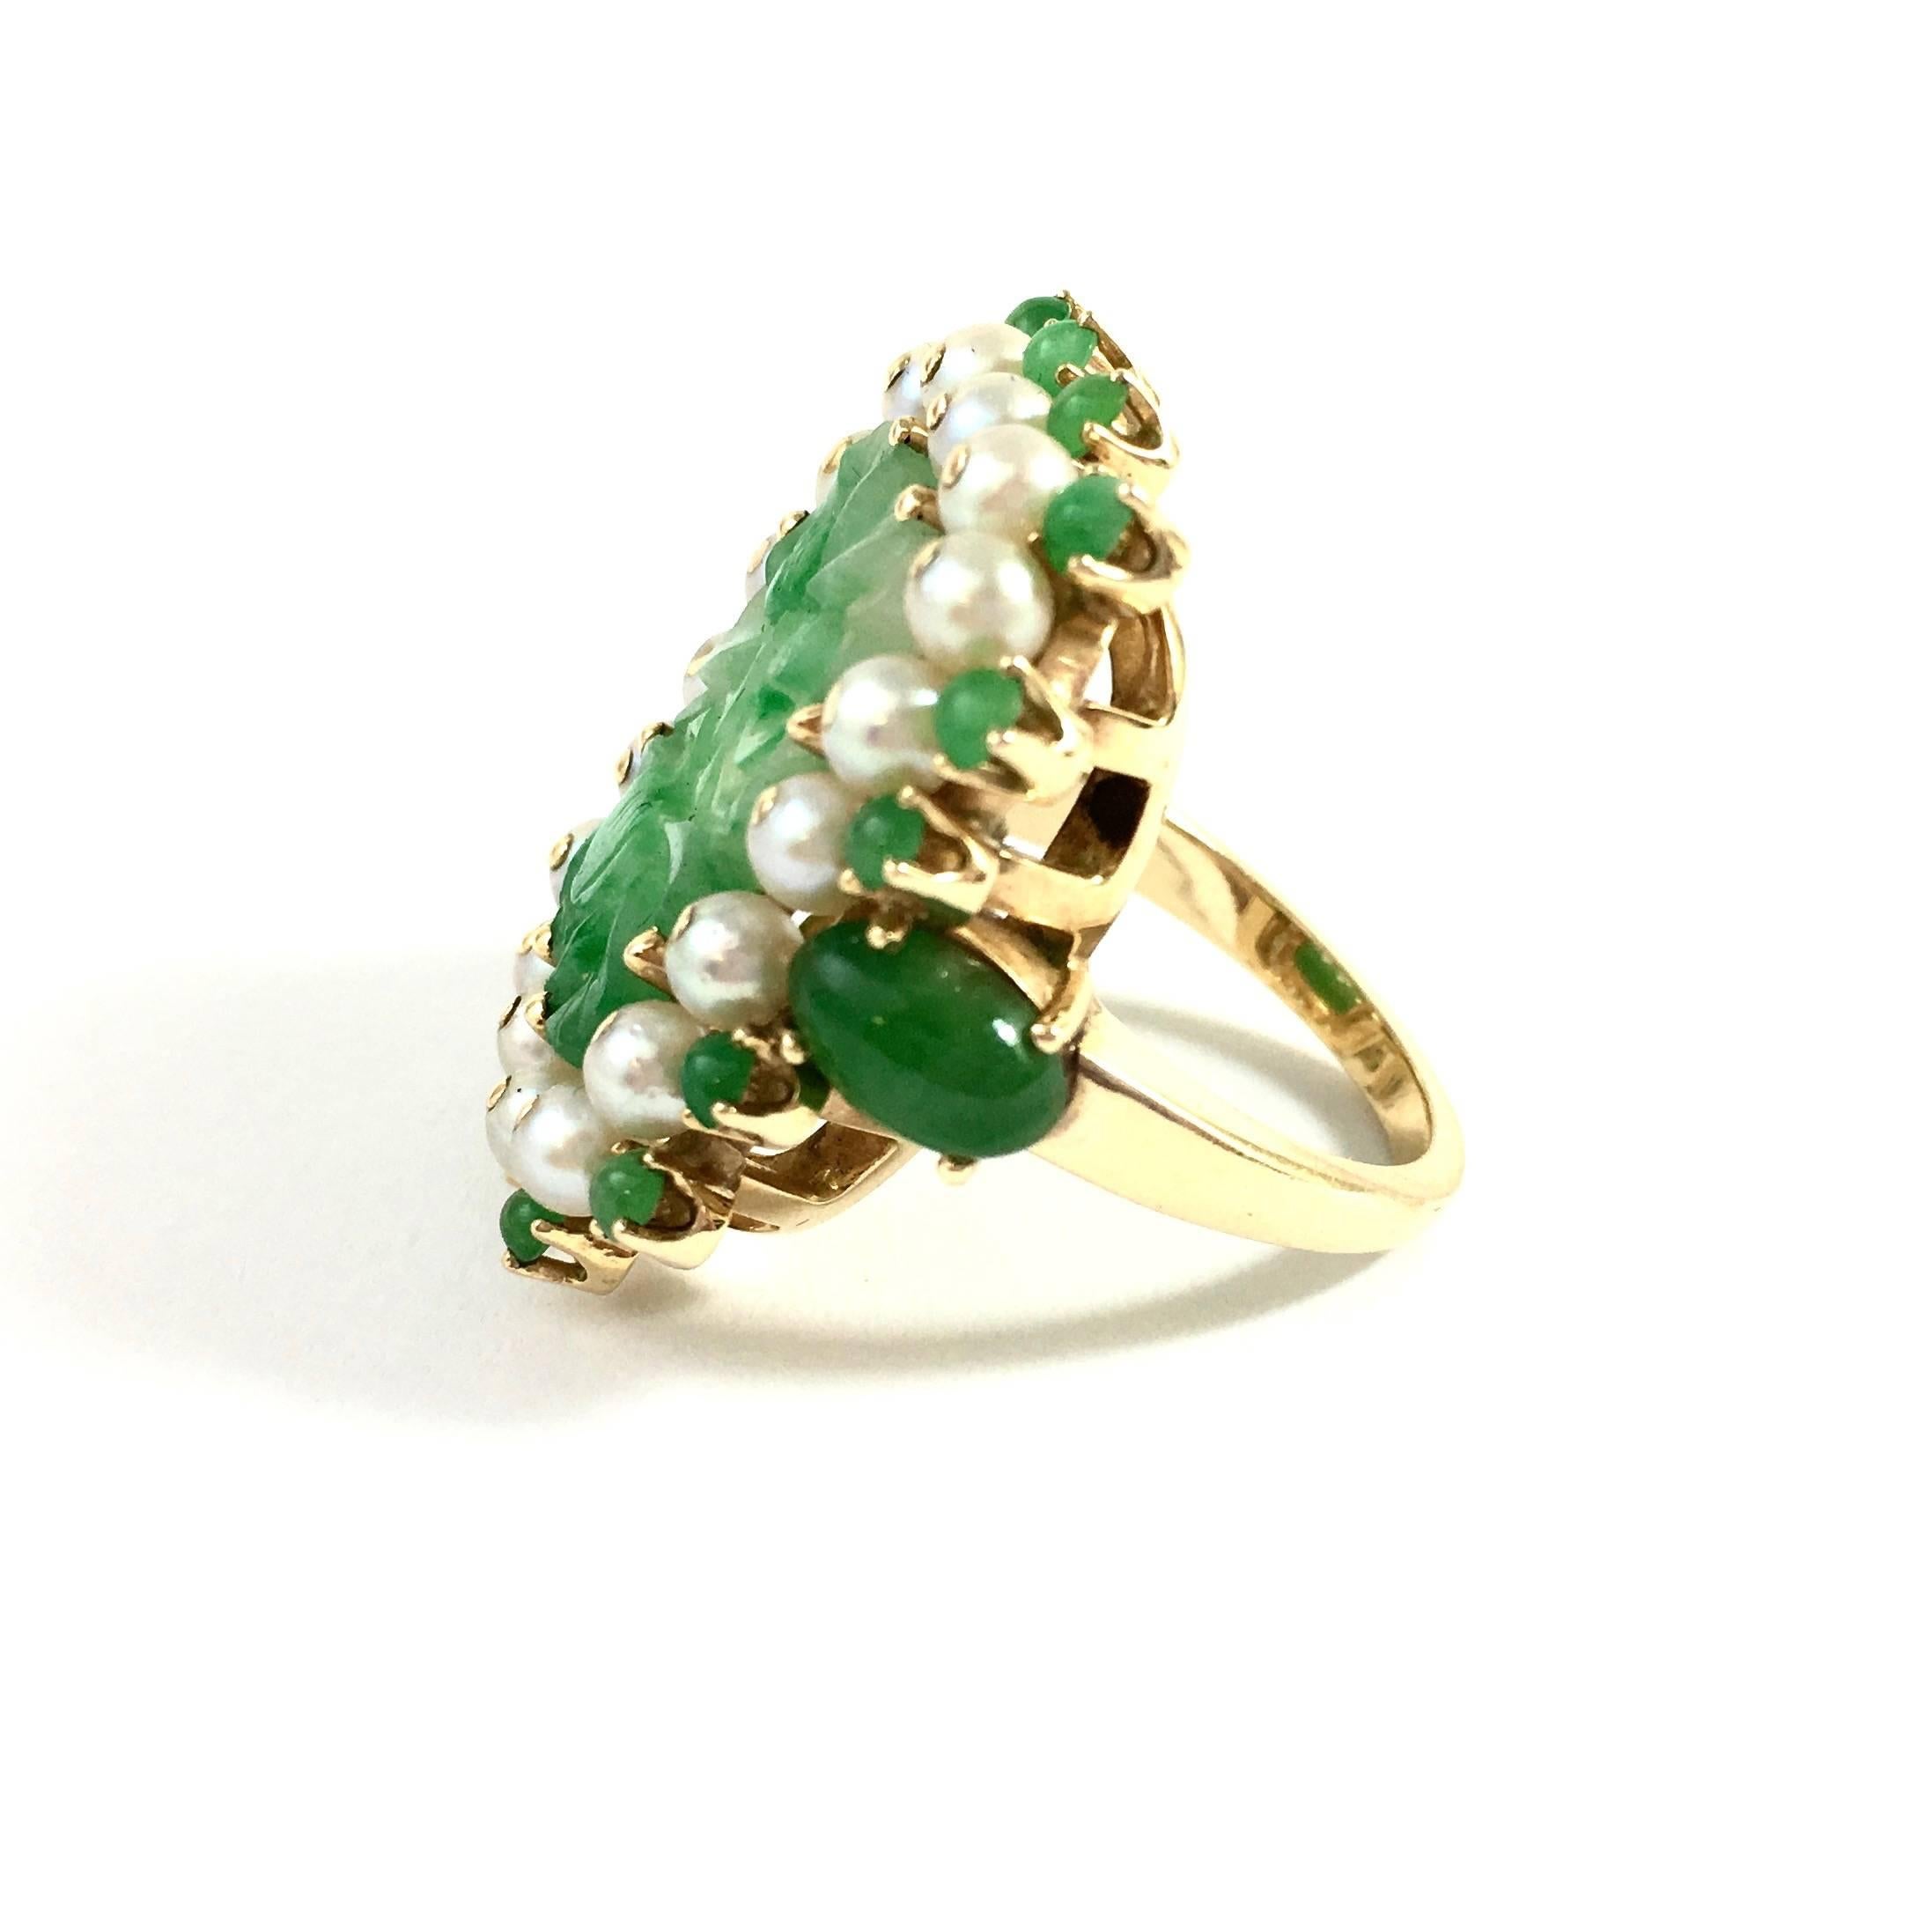 14K yellow gold ring, featuring a 17x11mm rectangular natural geen jade in the center, framed by an inner bezel of 3 mm cultured pearls and an outer bezel of 2 mm jade beads and 7.5x5mm oval cabochons on the shoulders. 
The front of the ring